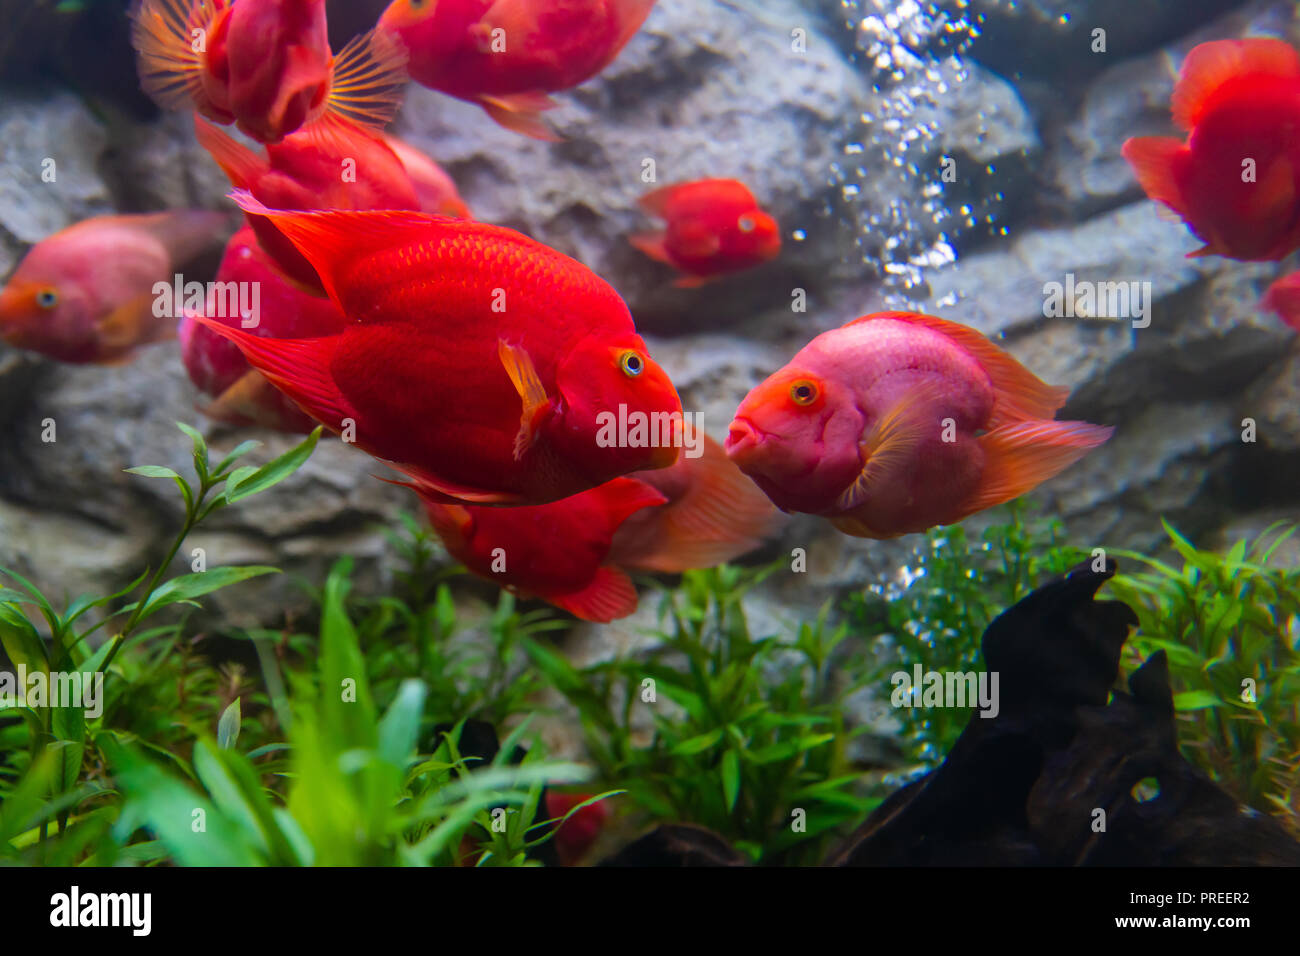 Blood parrot cichlid fish always kiss whenever they see each other Stock Photo